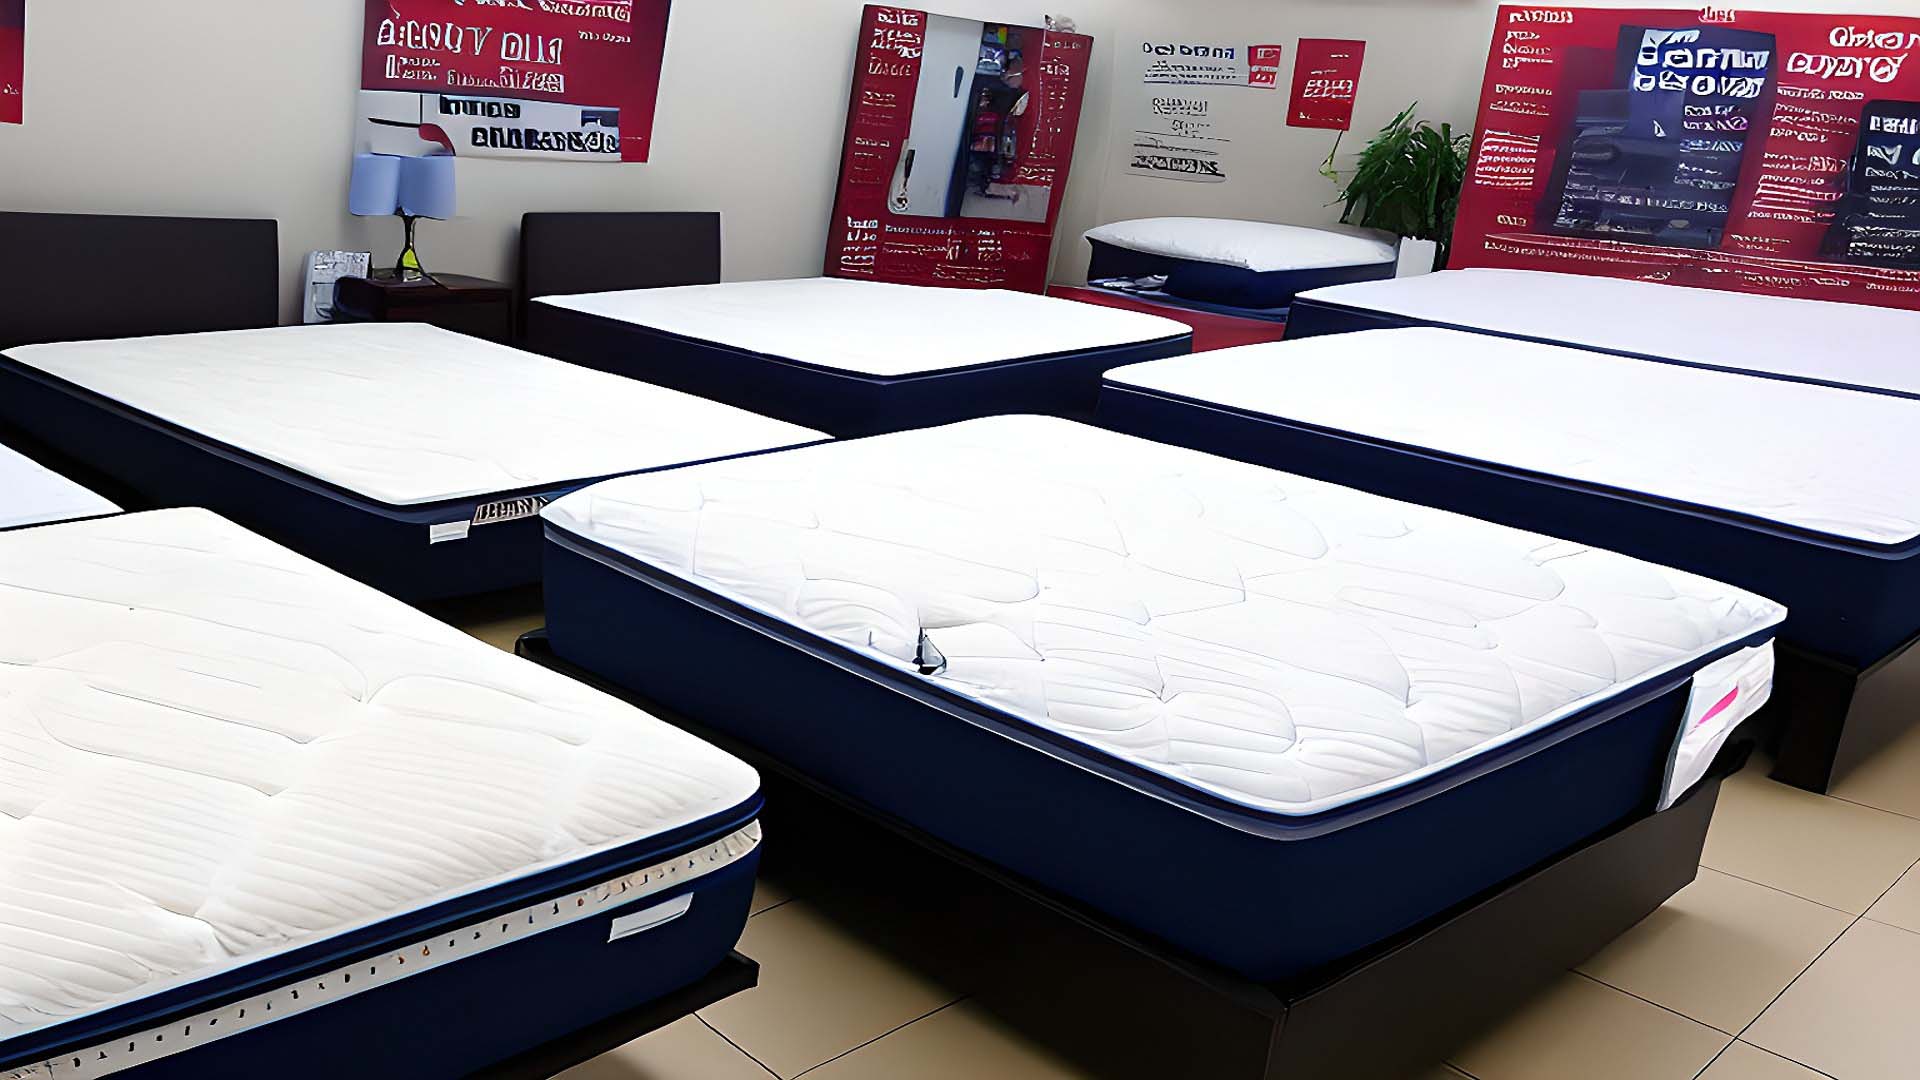 Mattress By Appointment in Troy, Michigan 48007